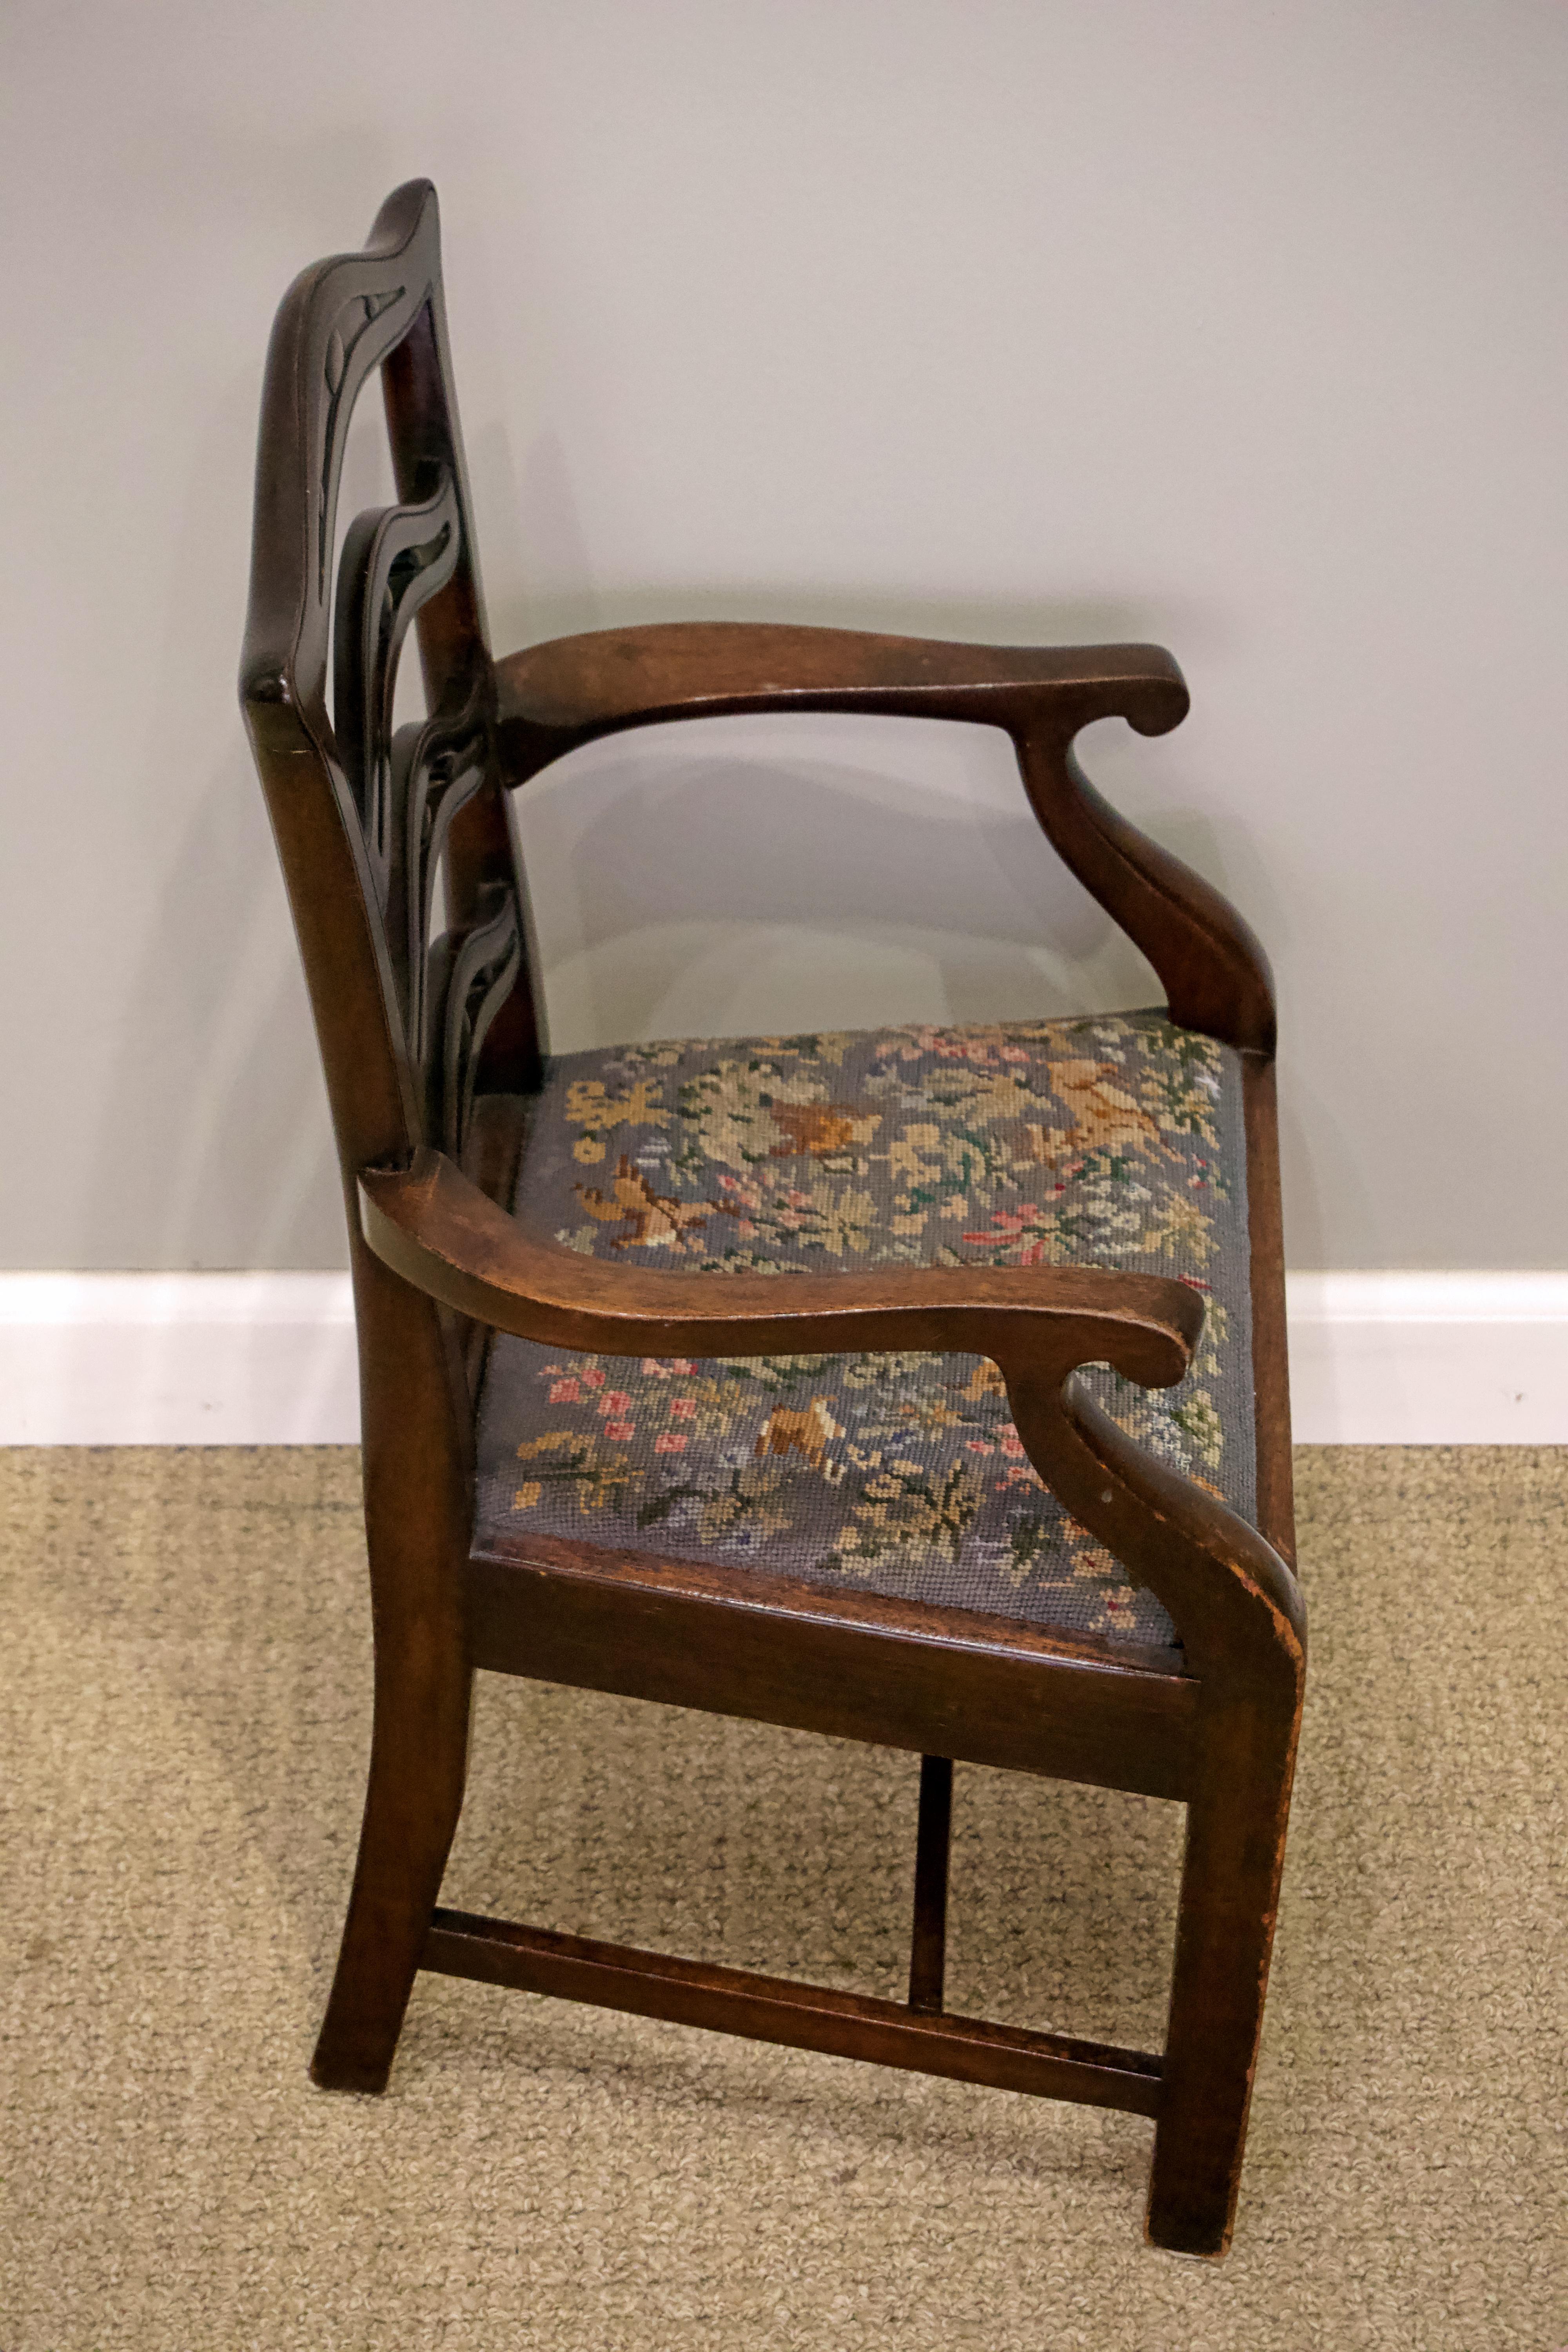 George III mahogany ladder back child's armchair, seat and needlework contemporary with period.